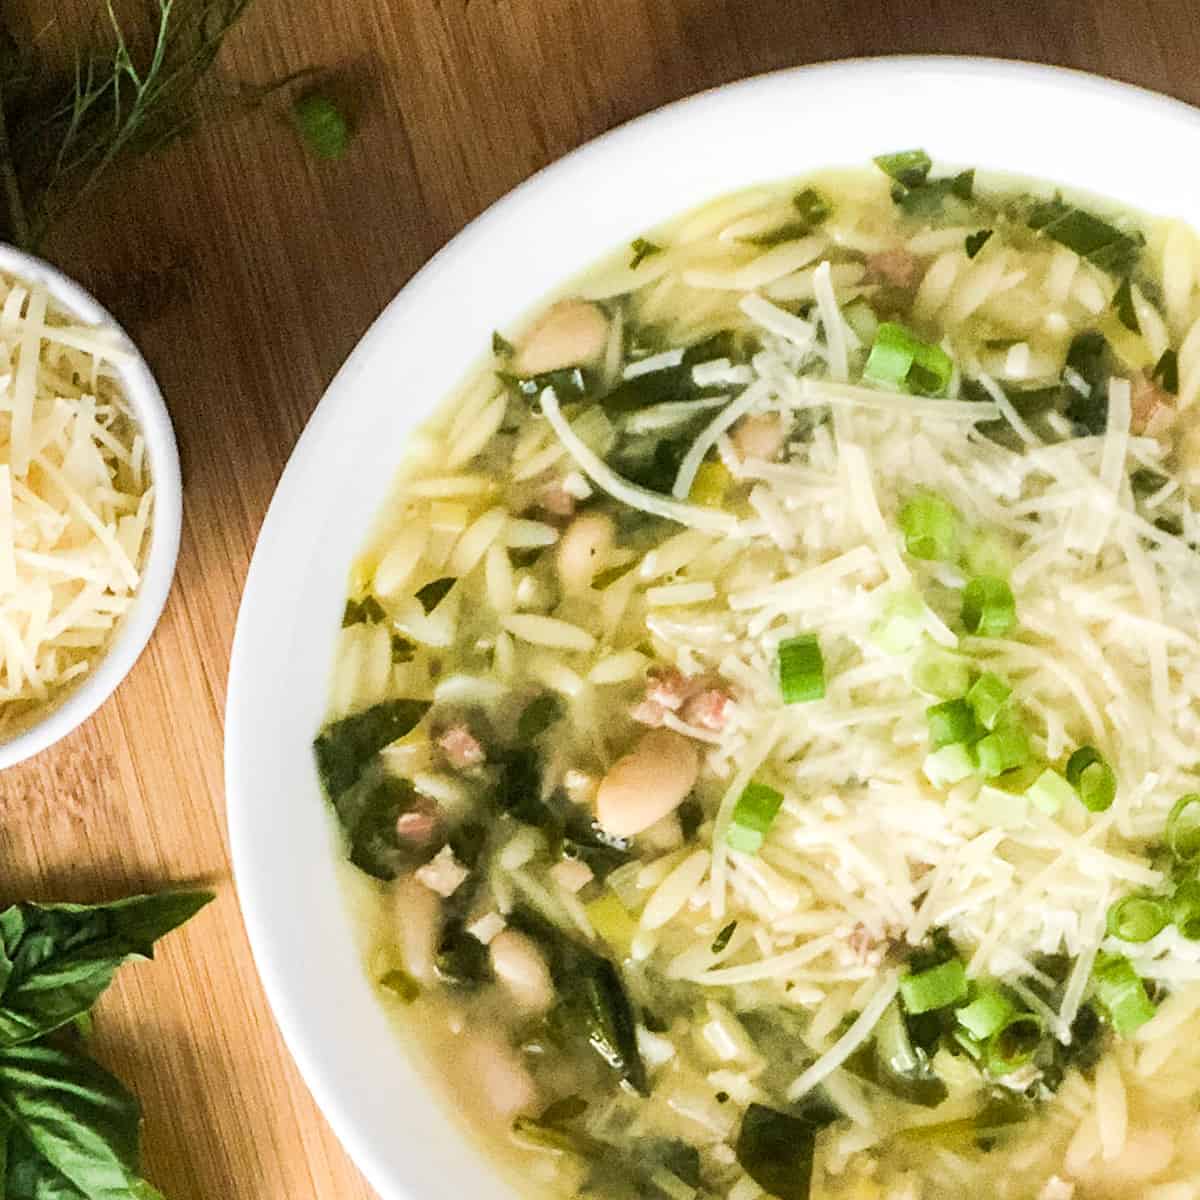 Orzo Soup with basil leaves and bowl of parmesan to the right.